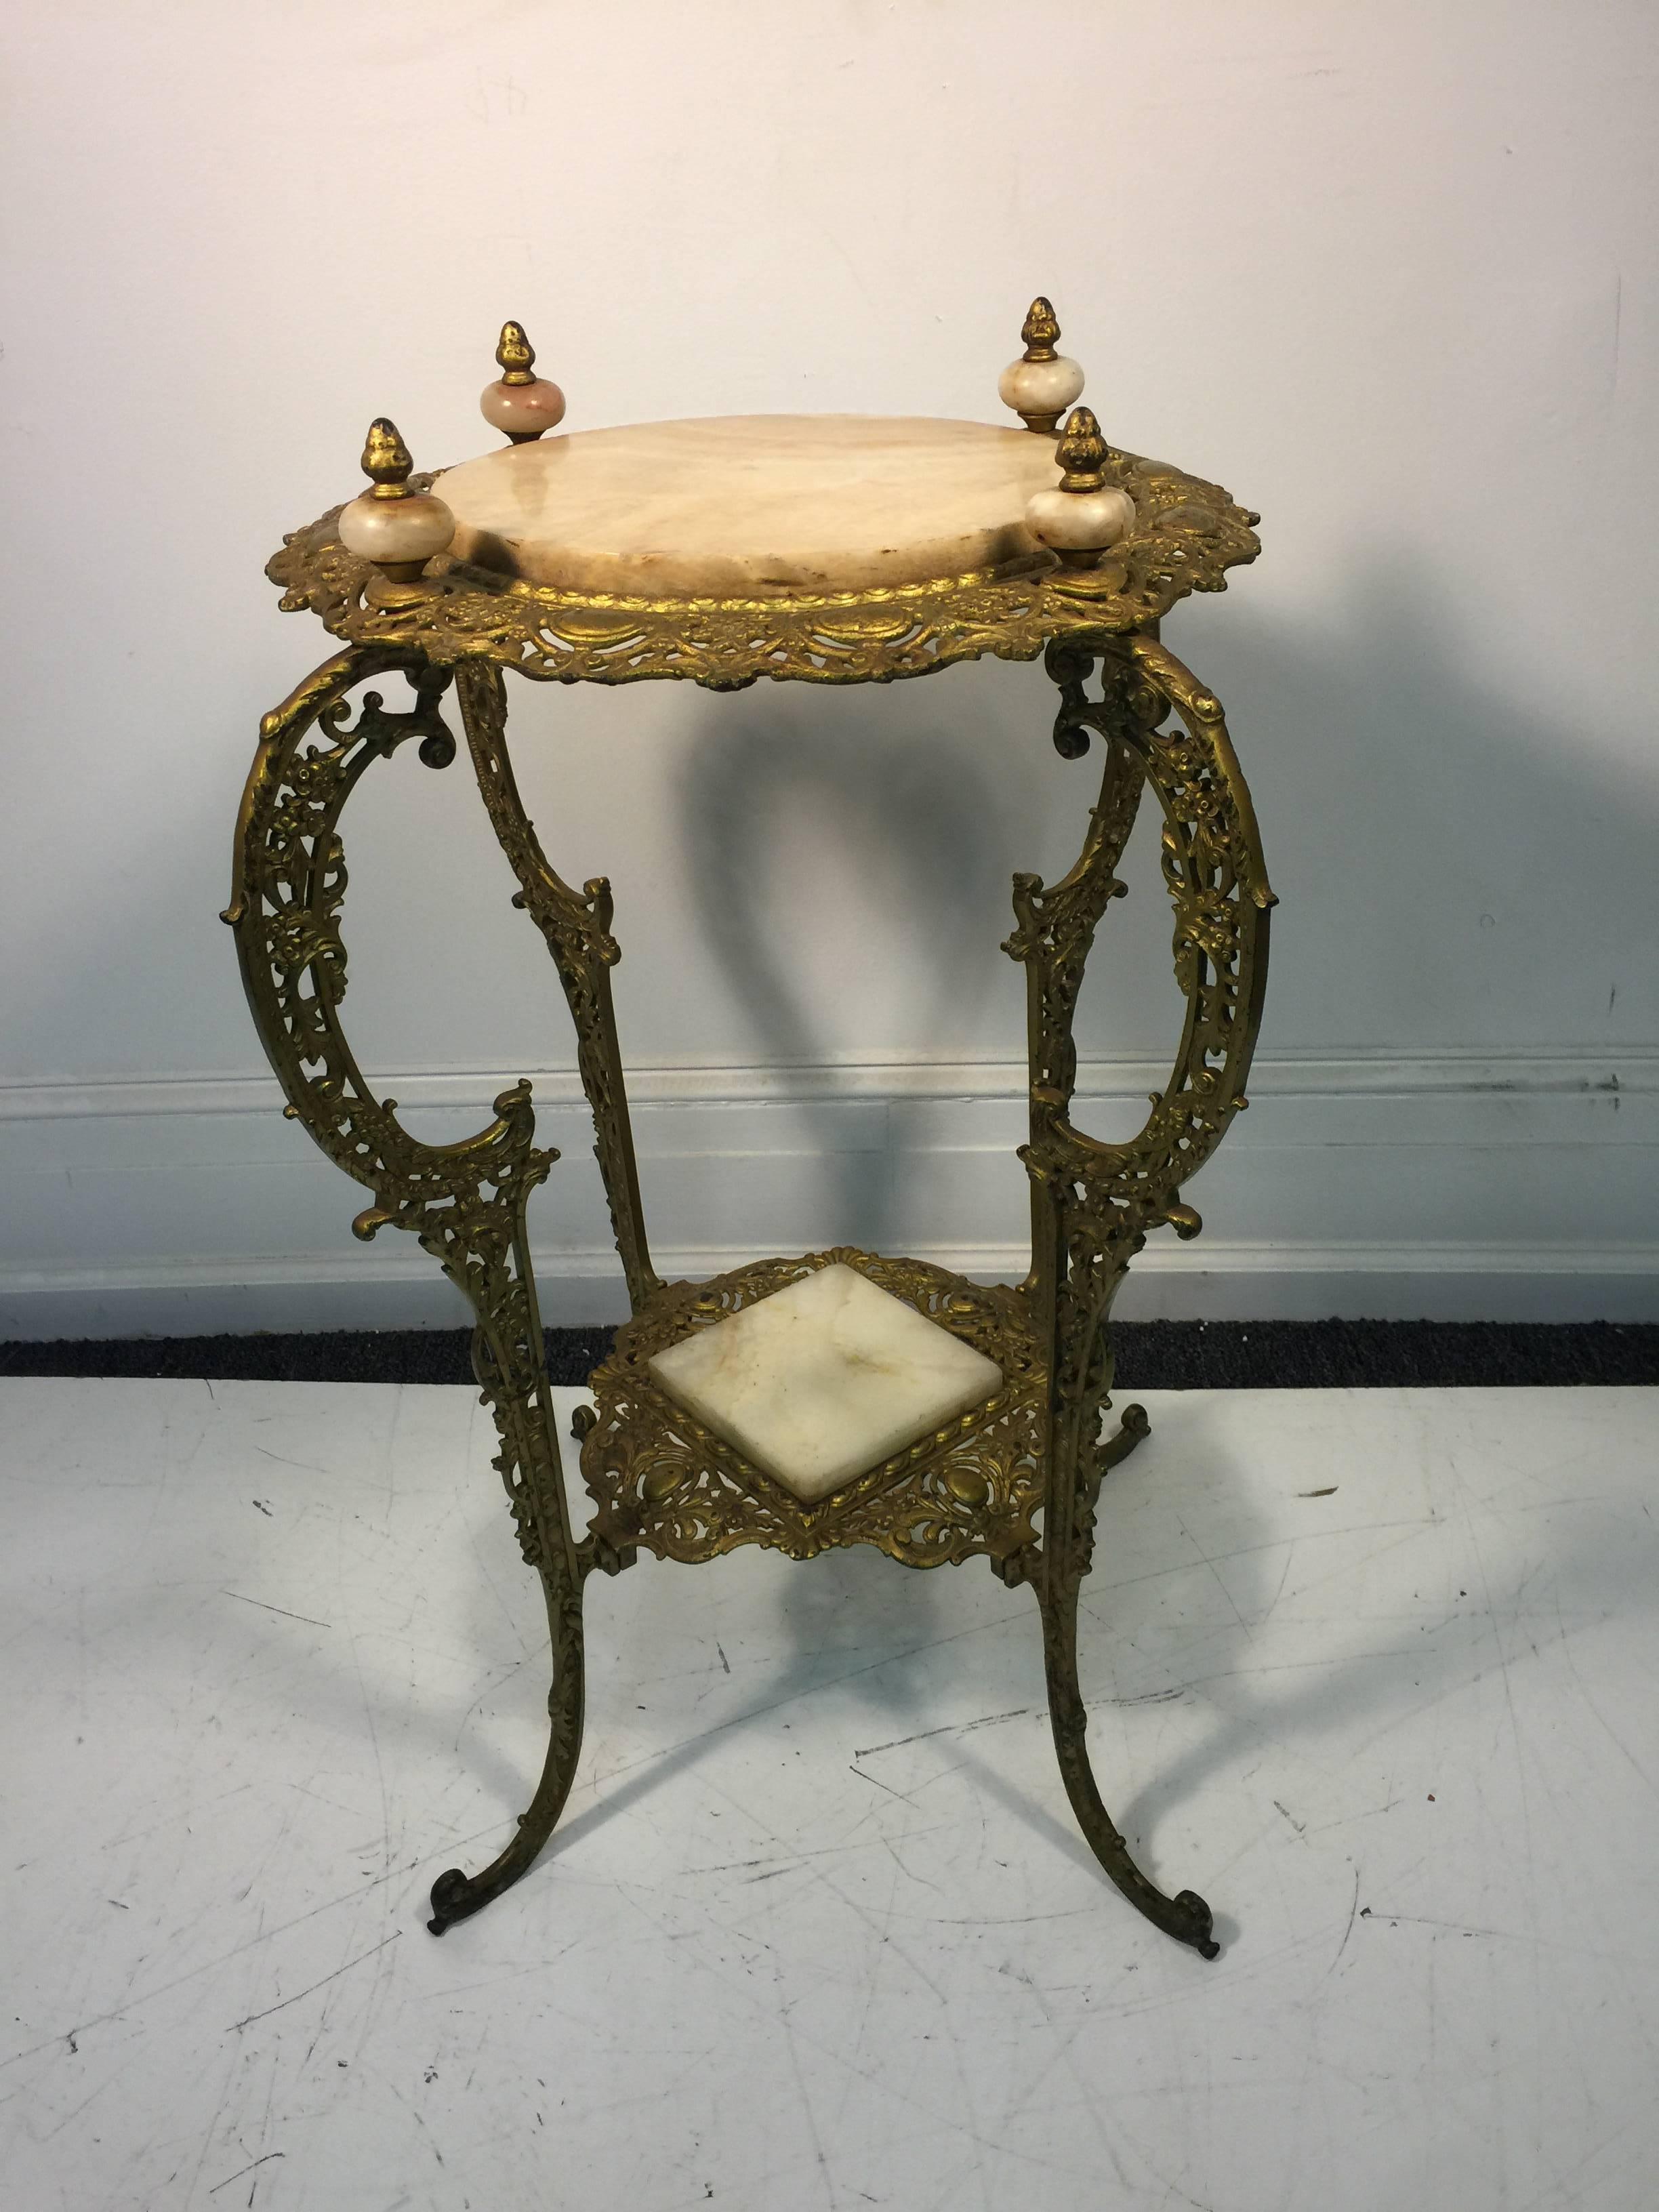 An amazing Art Nouveau two-tier onyx and gilded iron pant stand, circa 1910.